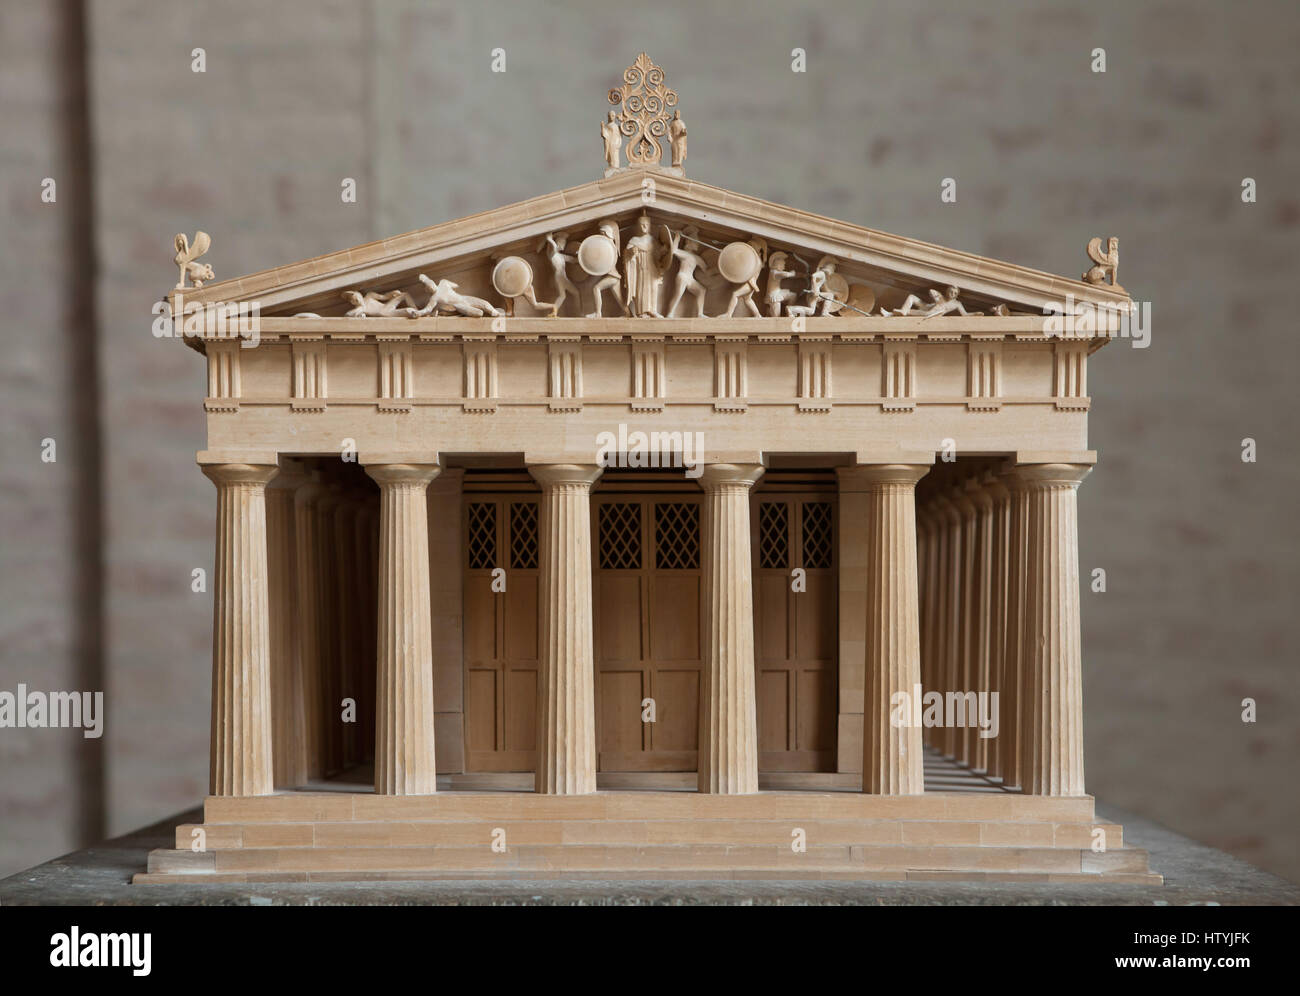 Scale model of the Temple of Aphaia on Aegina Island displayed in the Glyptothek Museum in Munich, Bavaria, Germany. Stock Photo